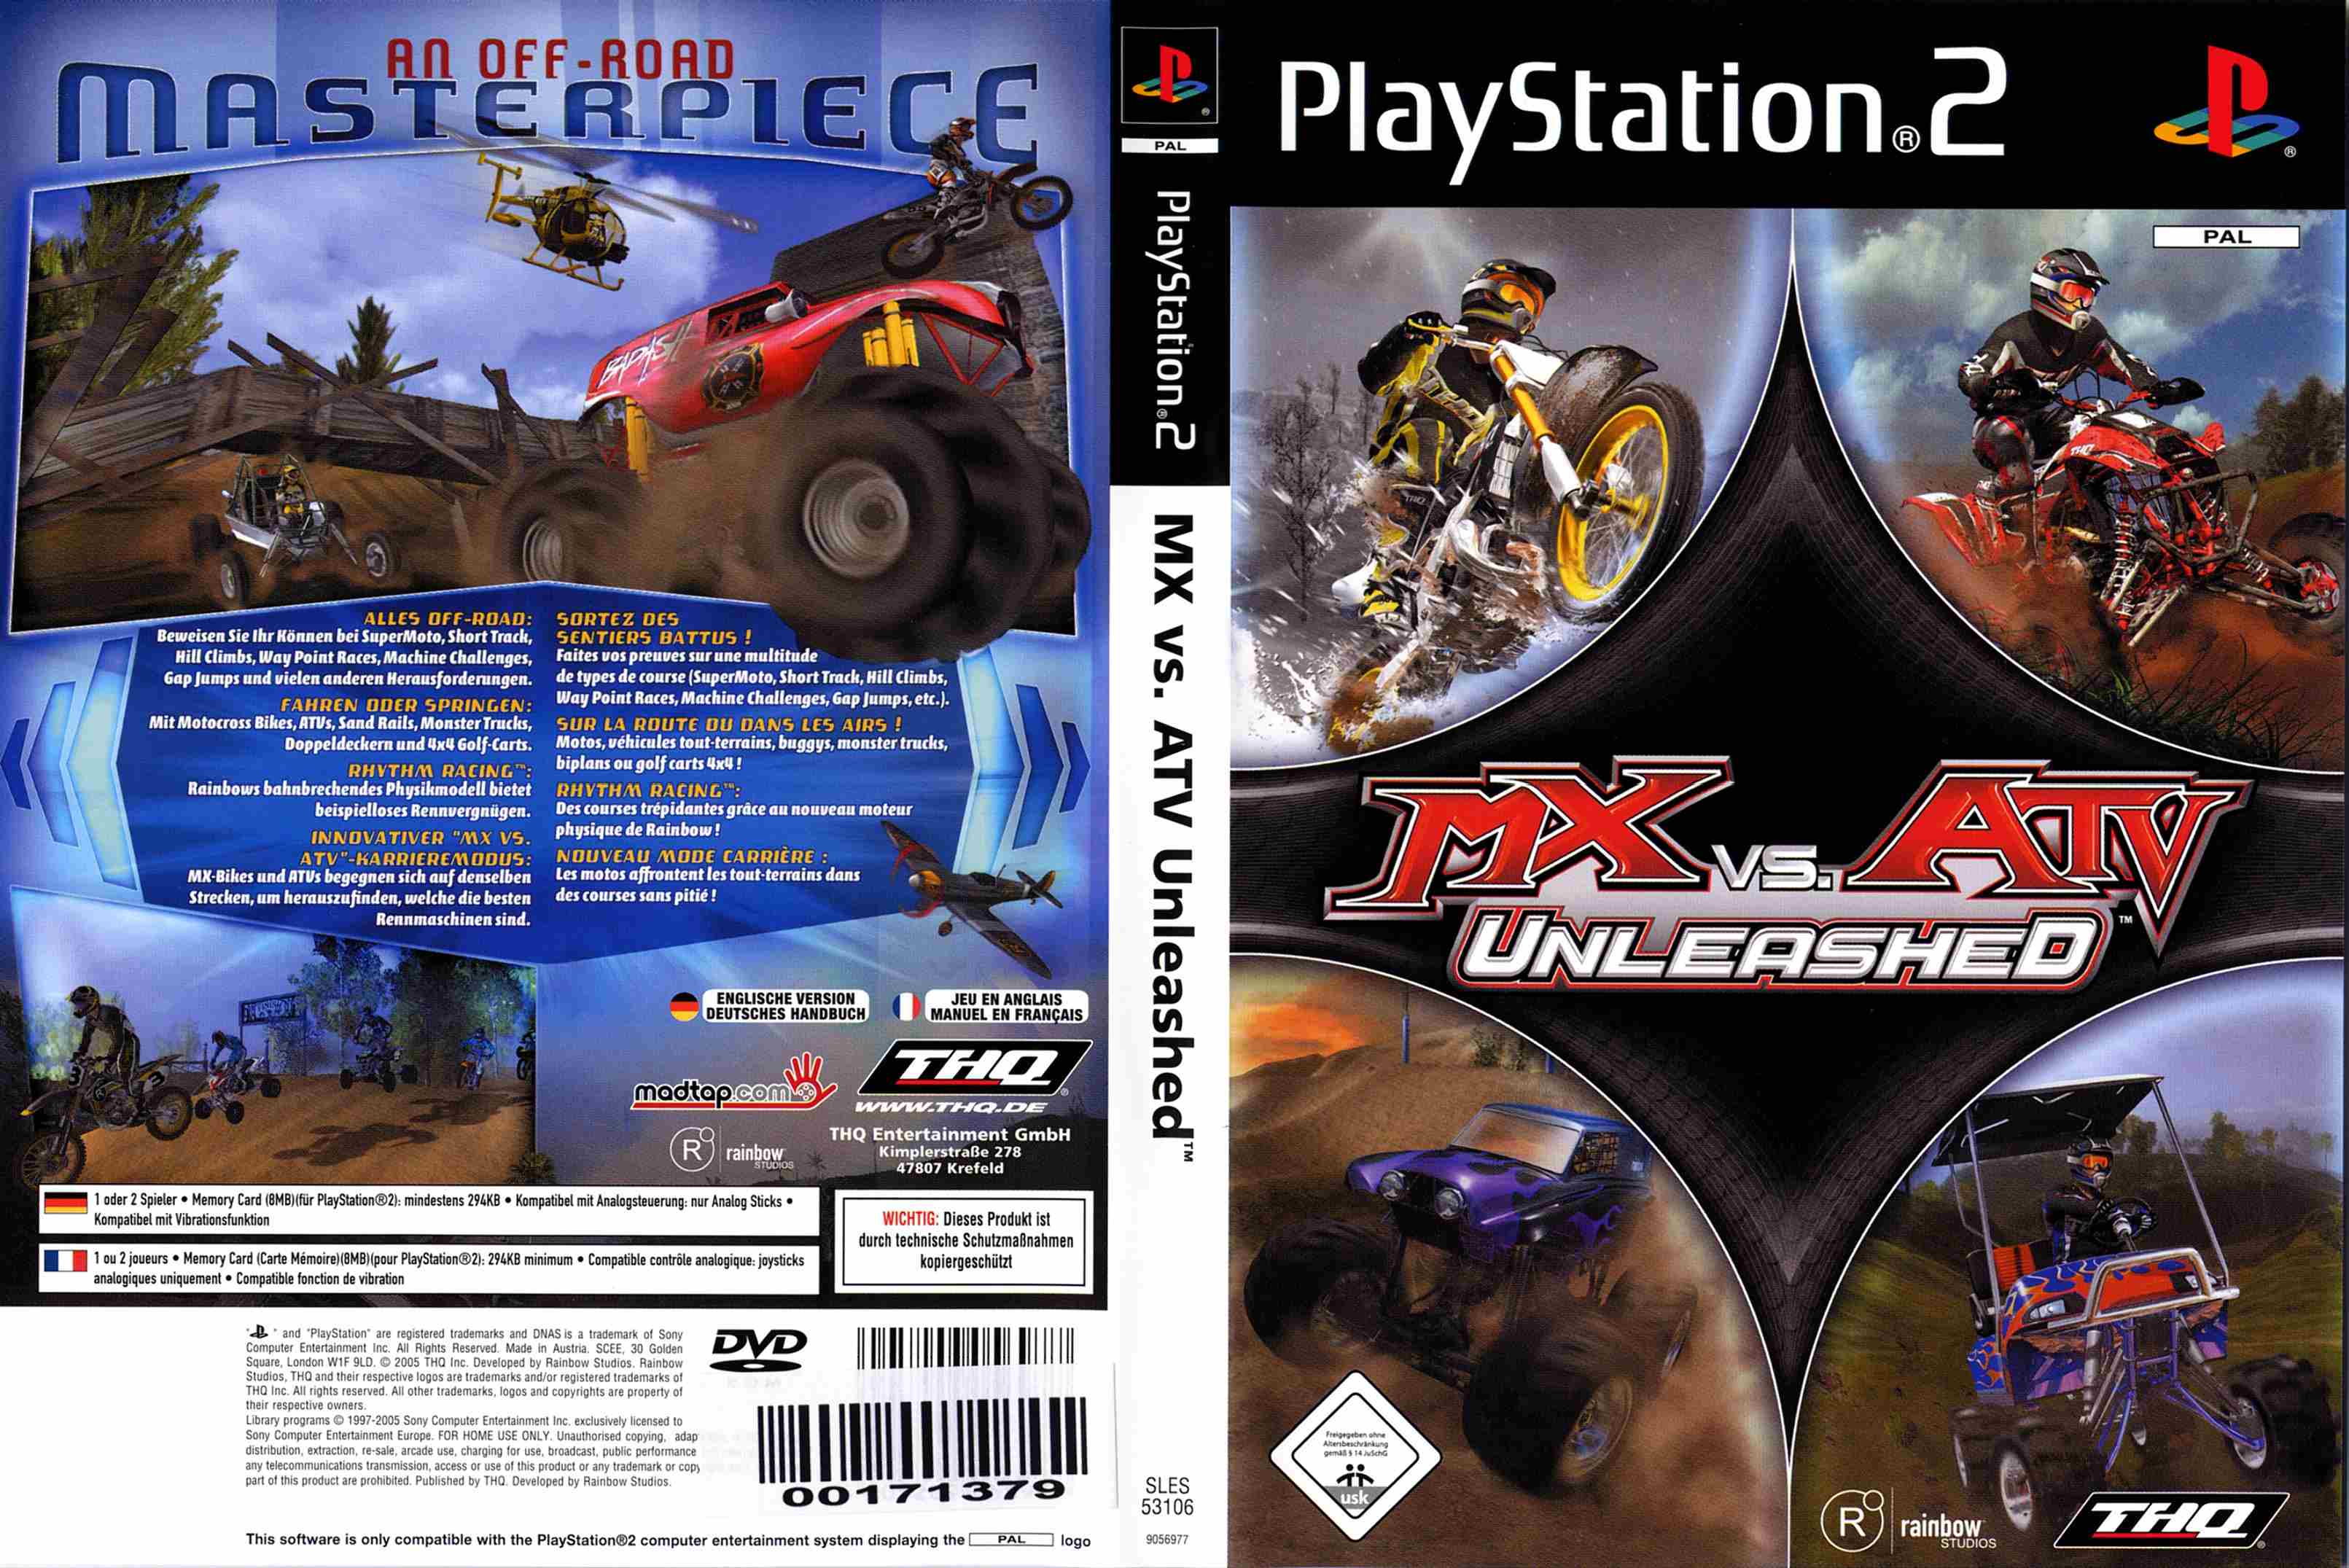 Mx Vs Atv Unleashed Dvd Playstation 2 Covers Cover Century Over 500 000 Album Art Covers For Free